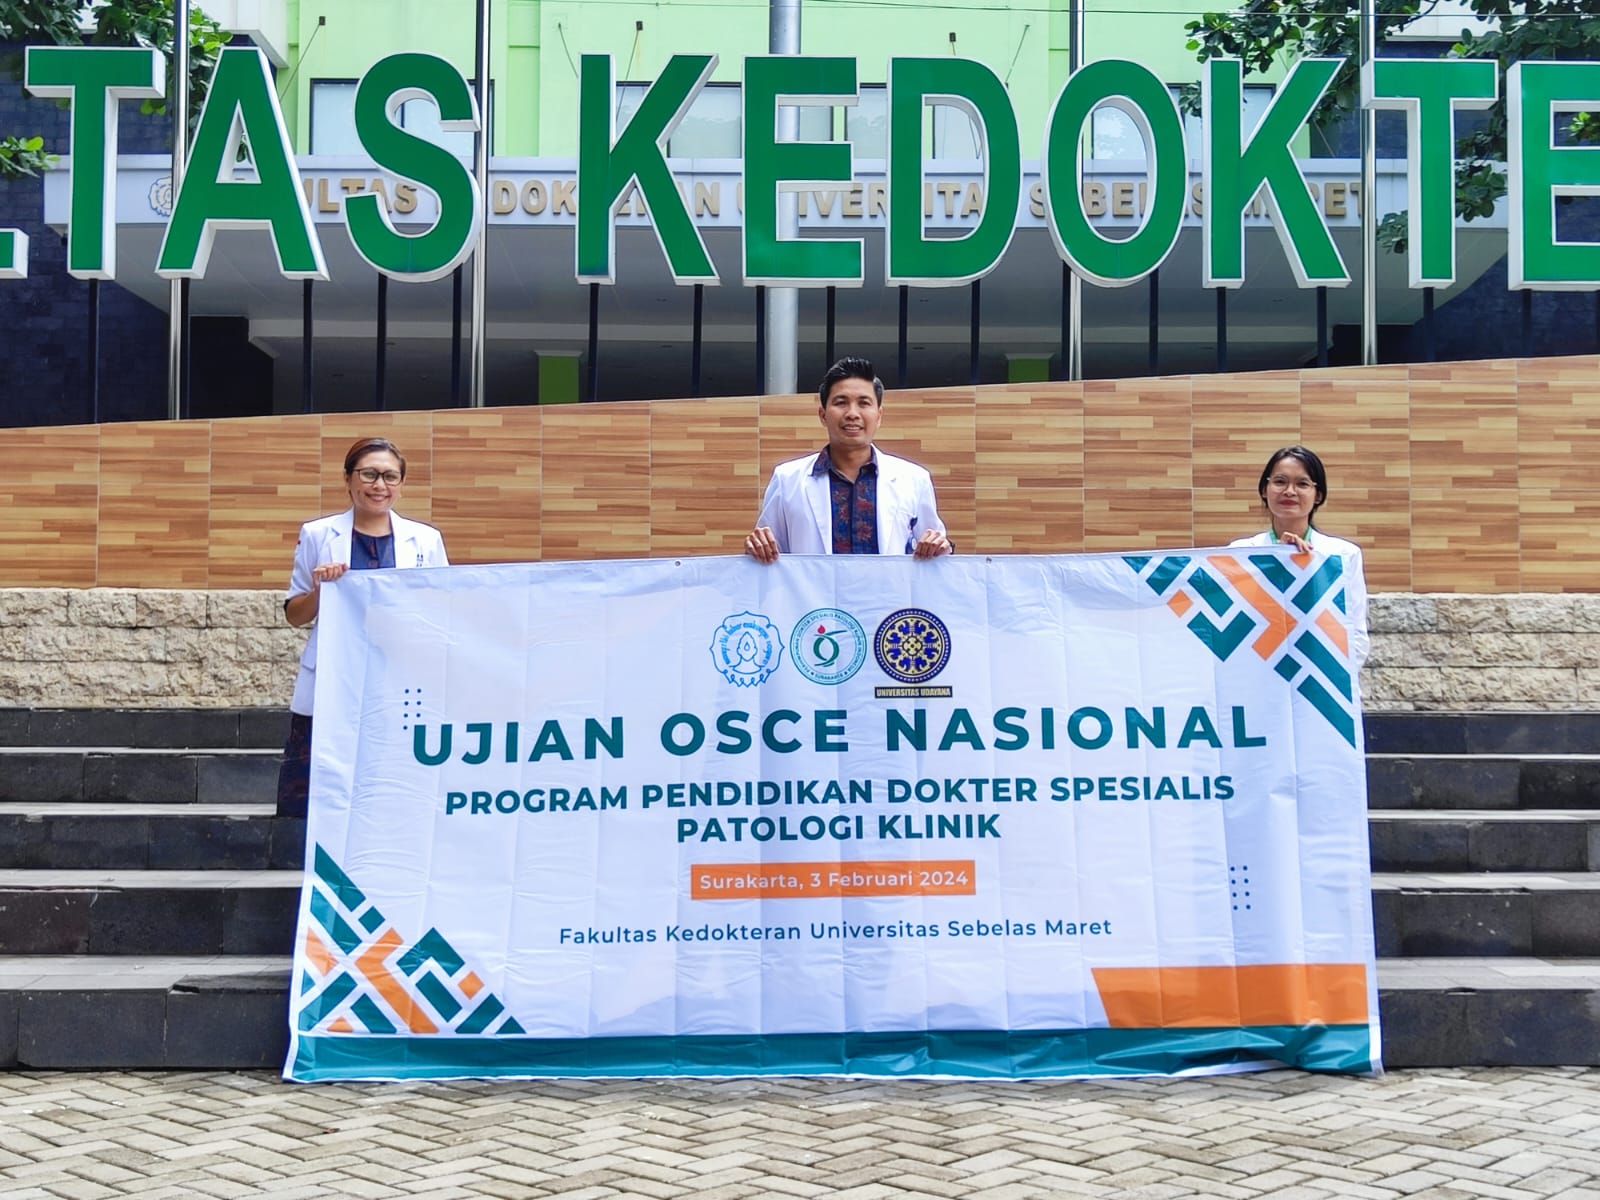 FK Unud Clinical Pathology Specialist Students Achieve 1st Place in the National OSCE Examination